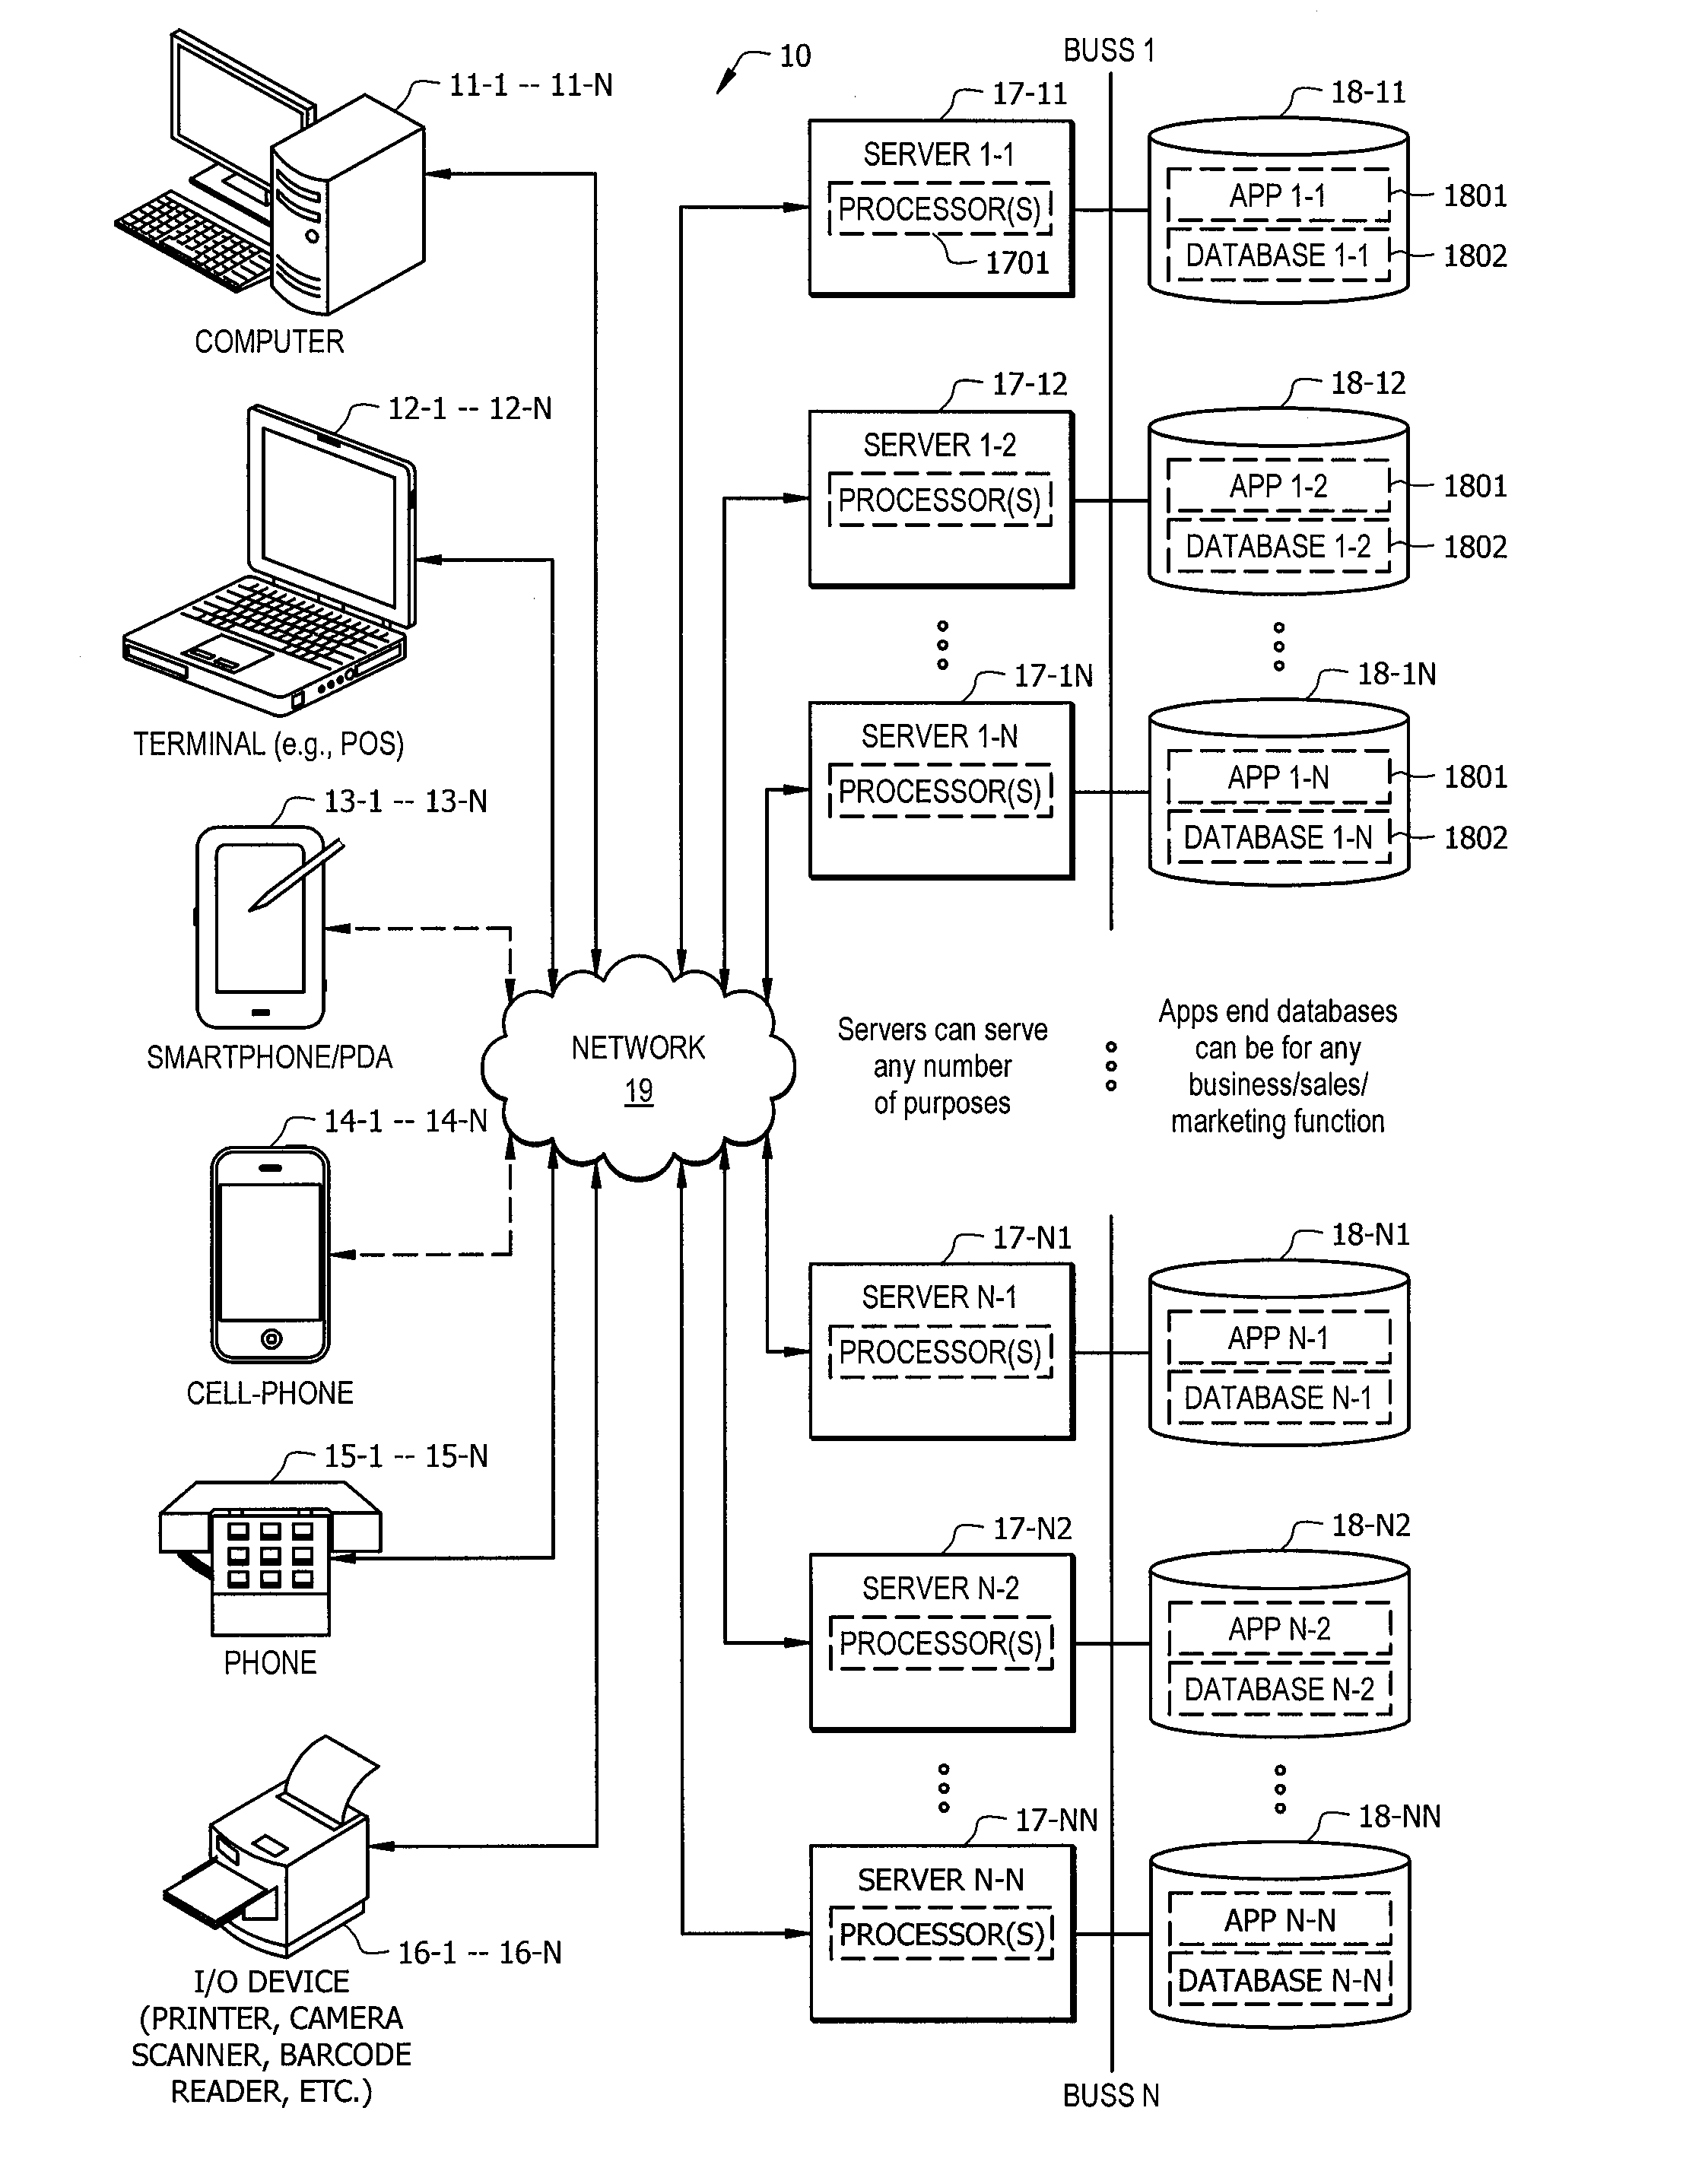 System and method for providing advanced merchant self-enabled merchandising based on various data